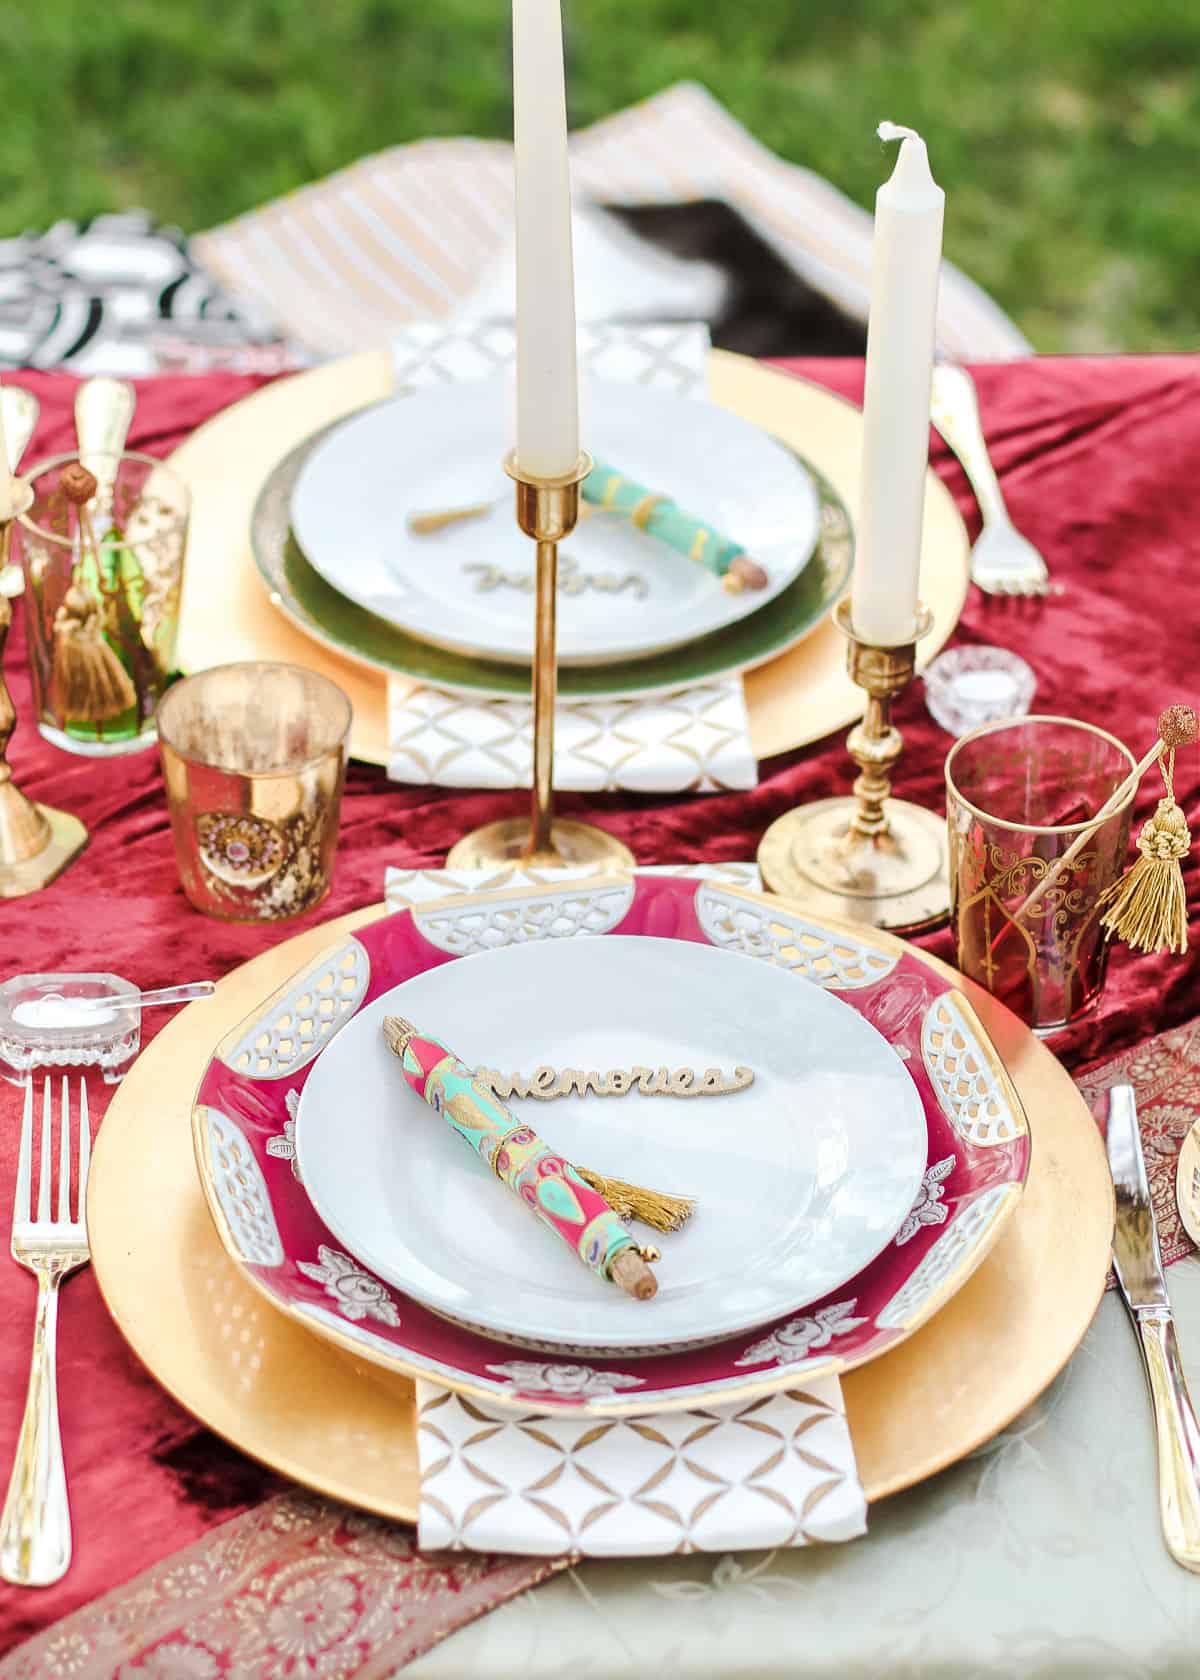 Table place setting with gold charger, decorative dinner plate, and white salad plate topped with colorful paper scroll.